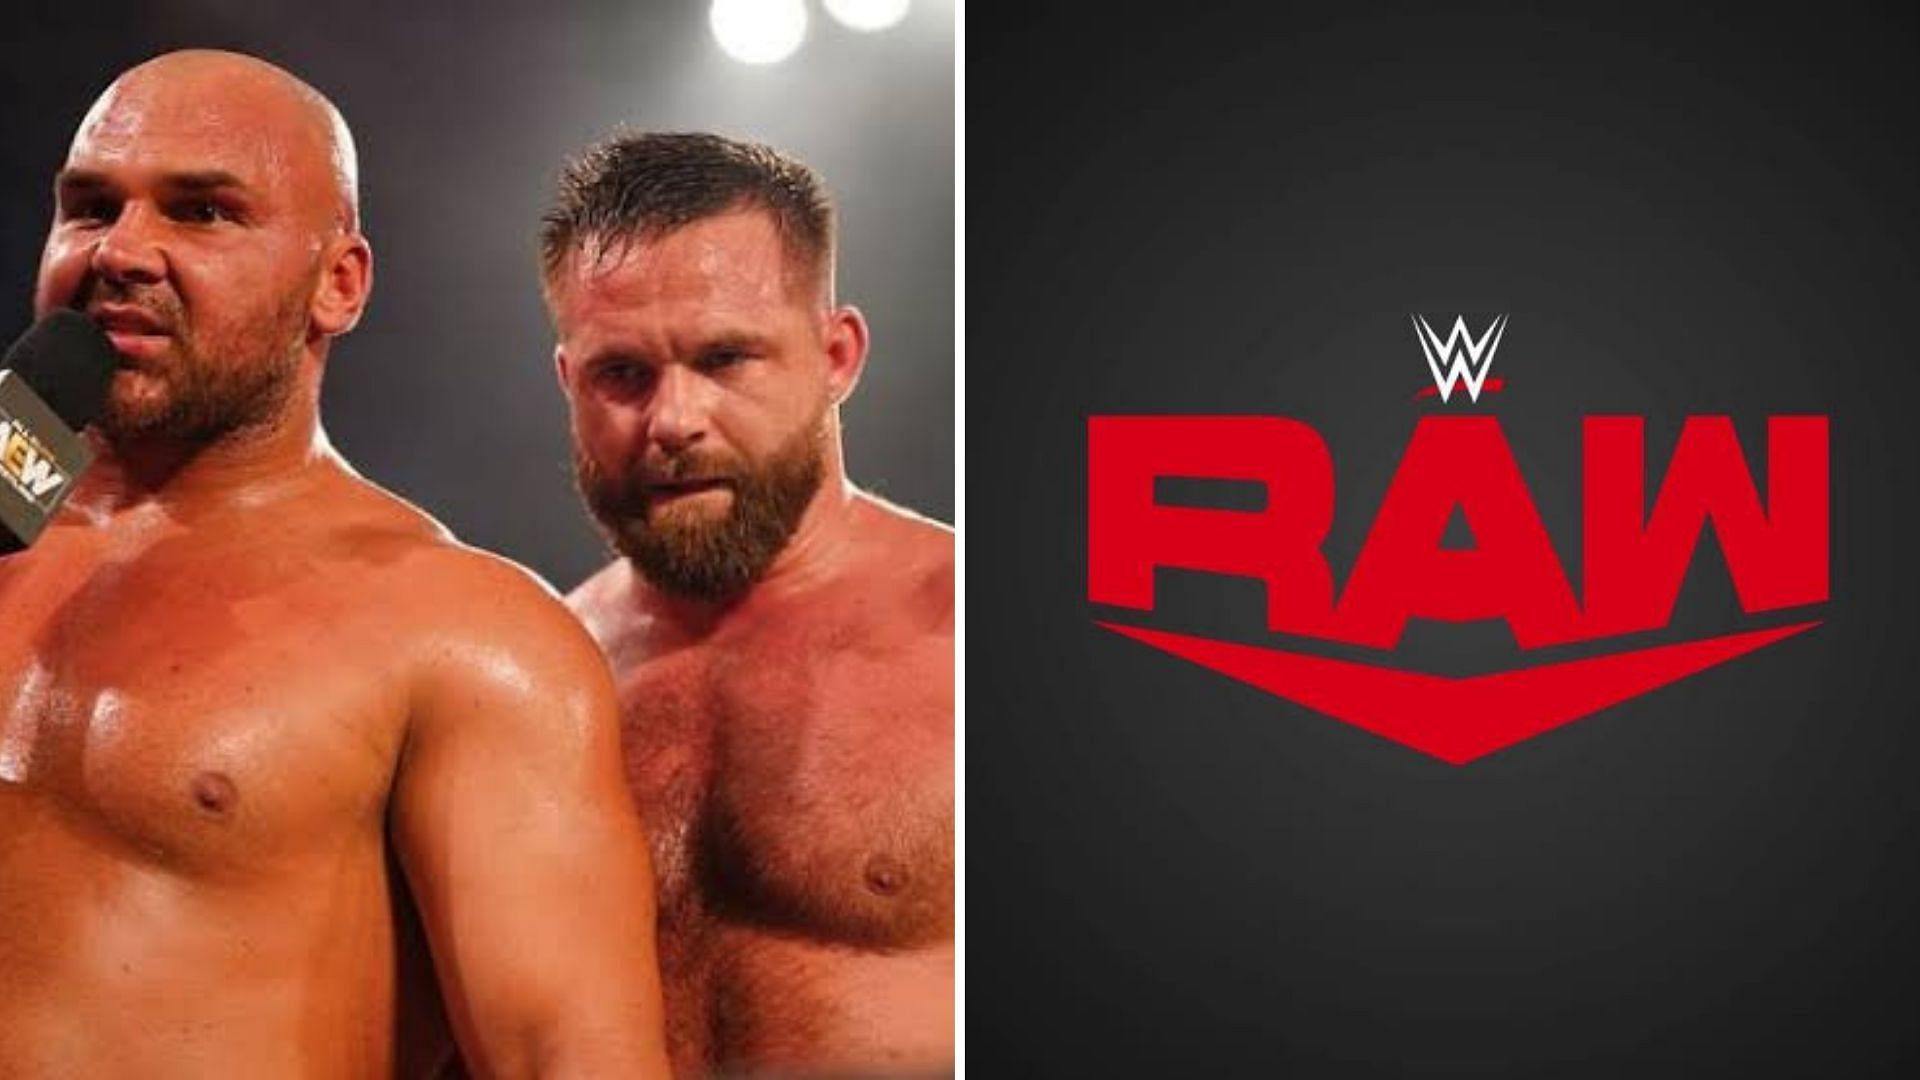 The former RAW Tag Team Champions left WWE in 2020.